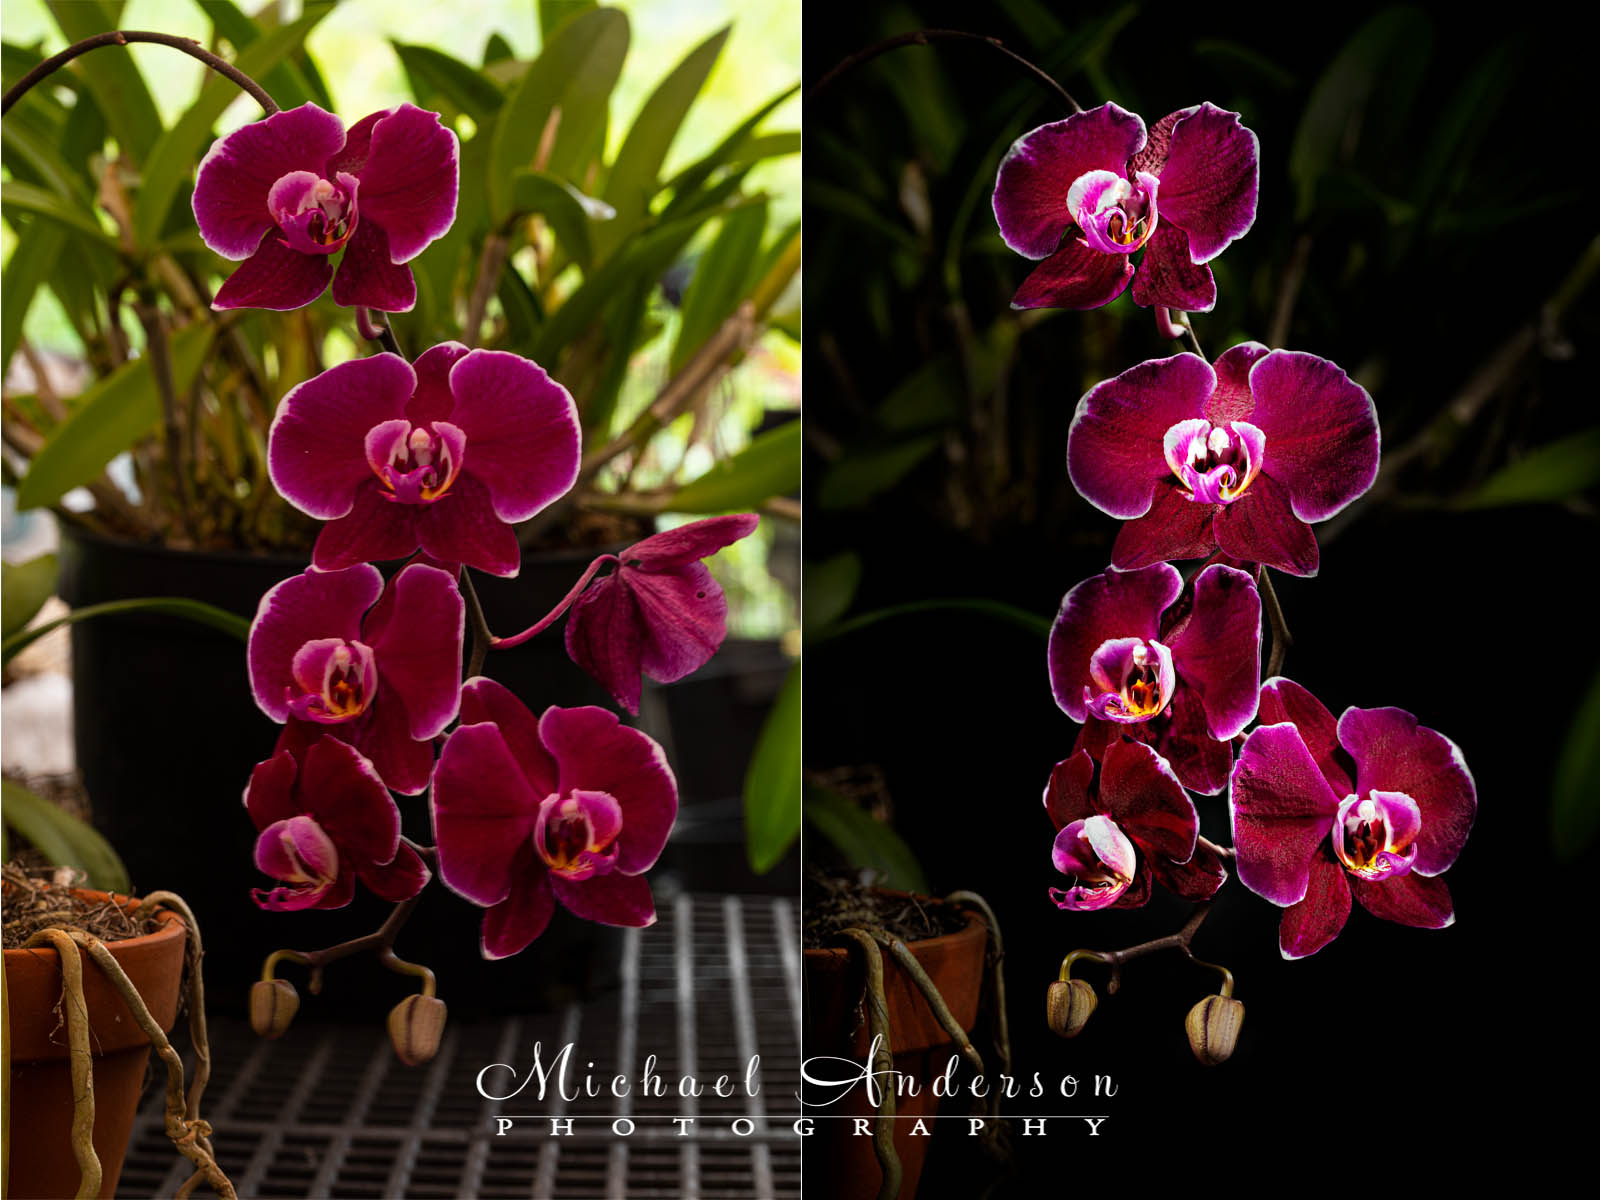 Before and after light painting photographs of a Classic Phalaenopsis Orchid.